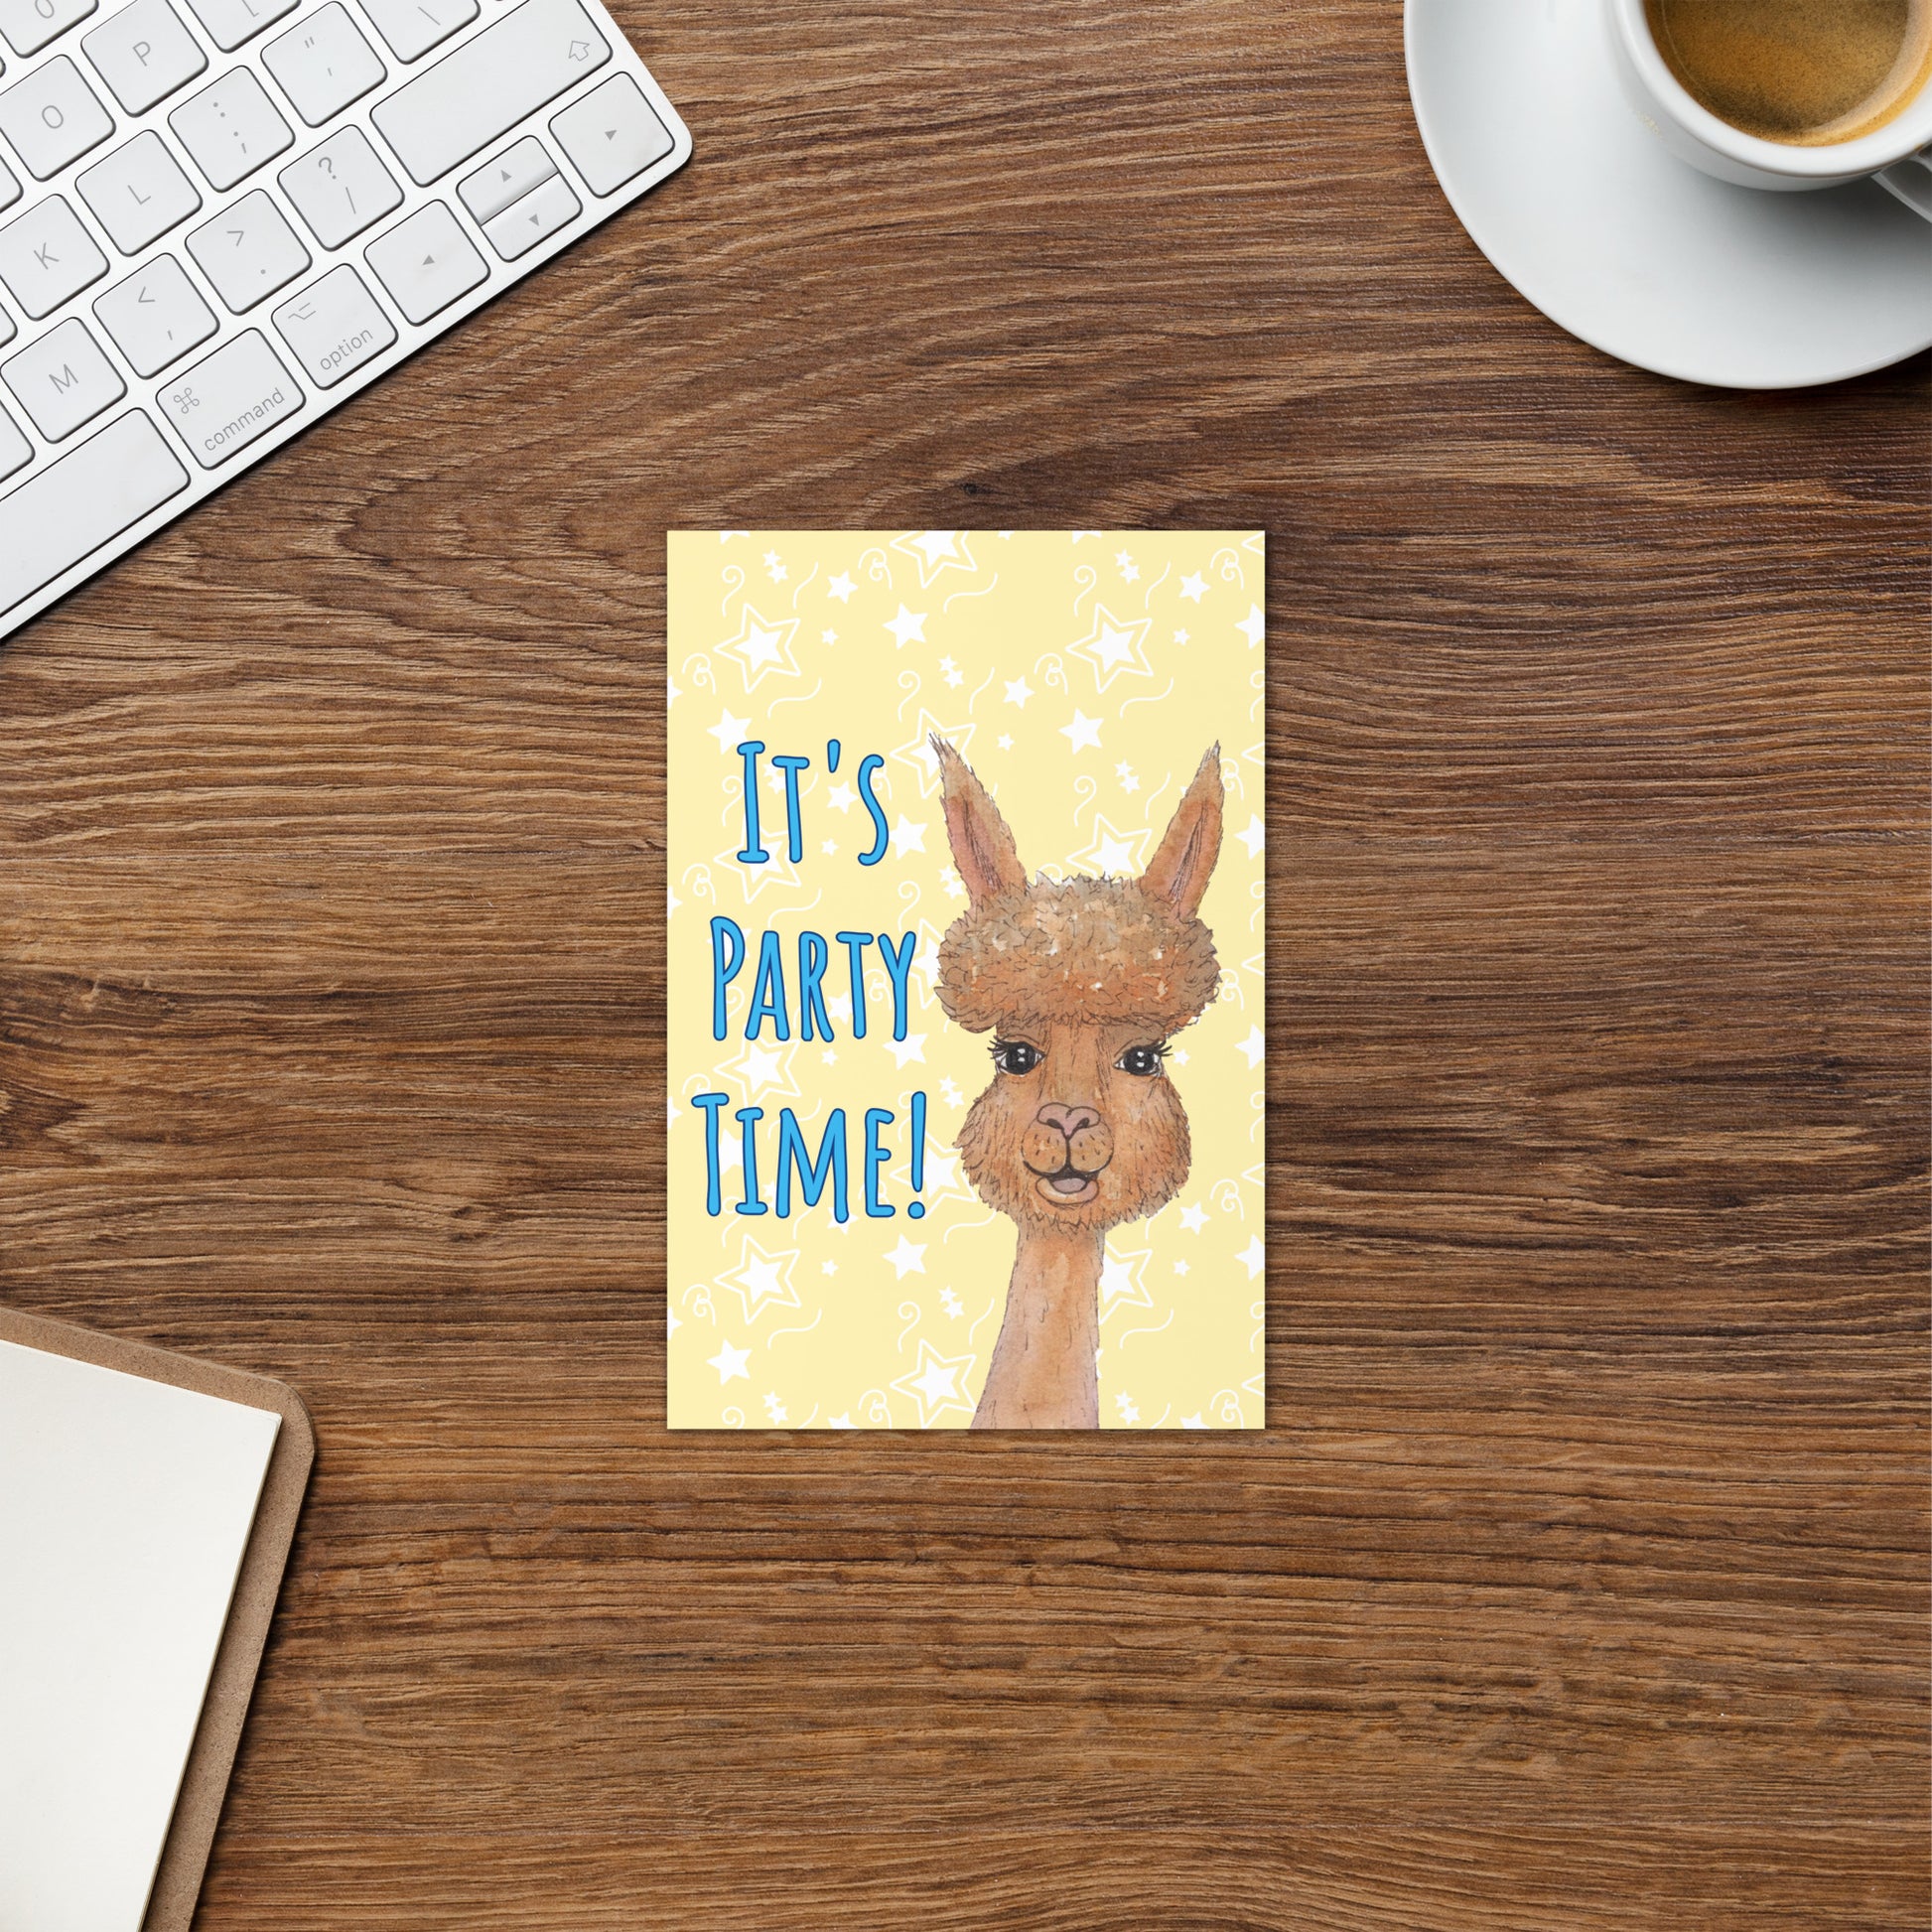 4 by 6 inch party alpaca greeting card. Image shows front cover by keyboard and coffee cup. Background is pastel yellow with white star accents. Front has watercolor alpaca and text: It's party time!